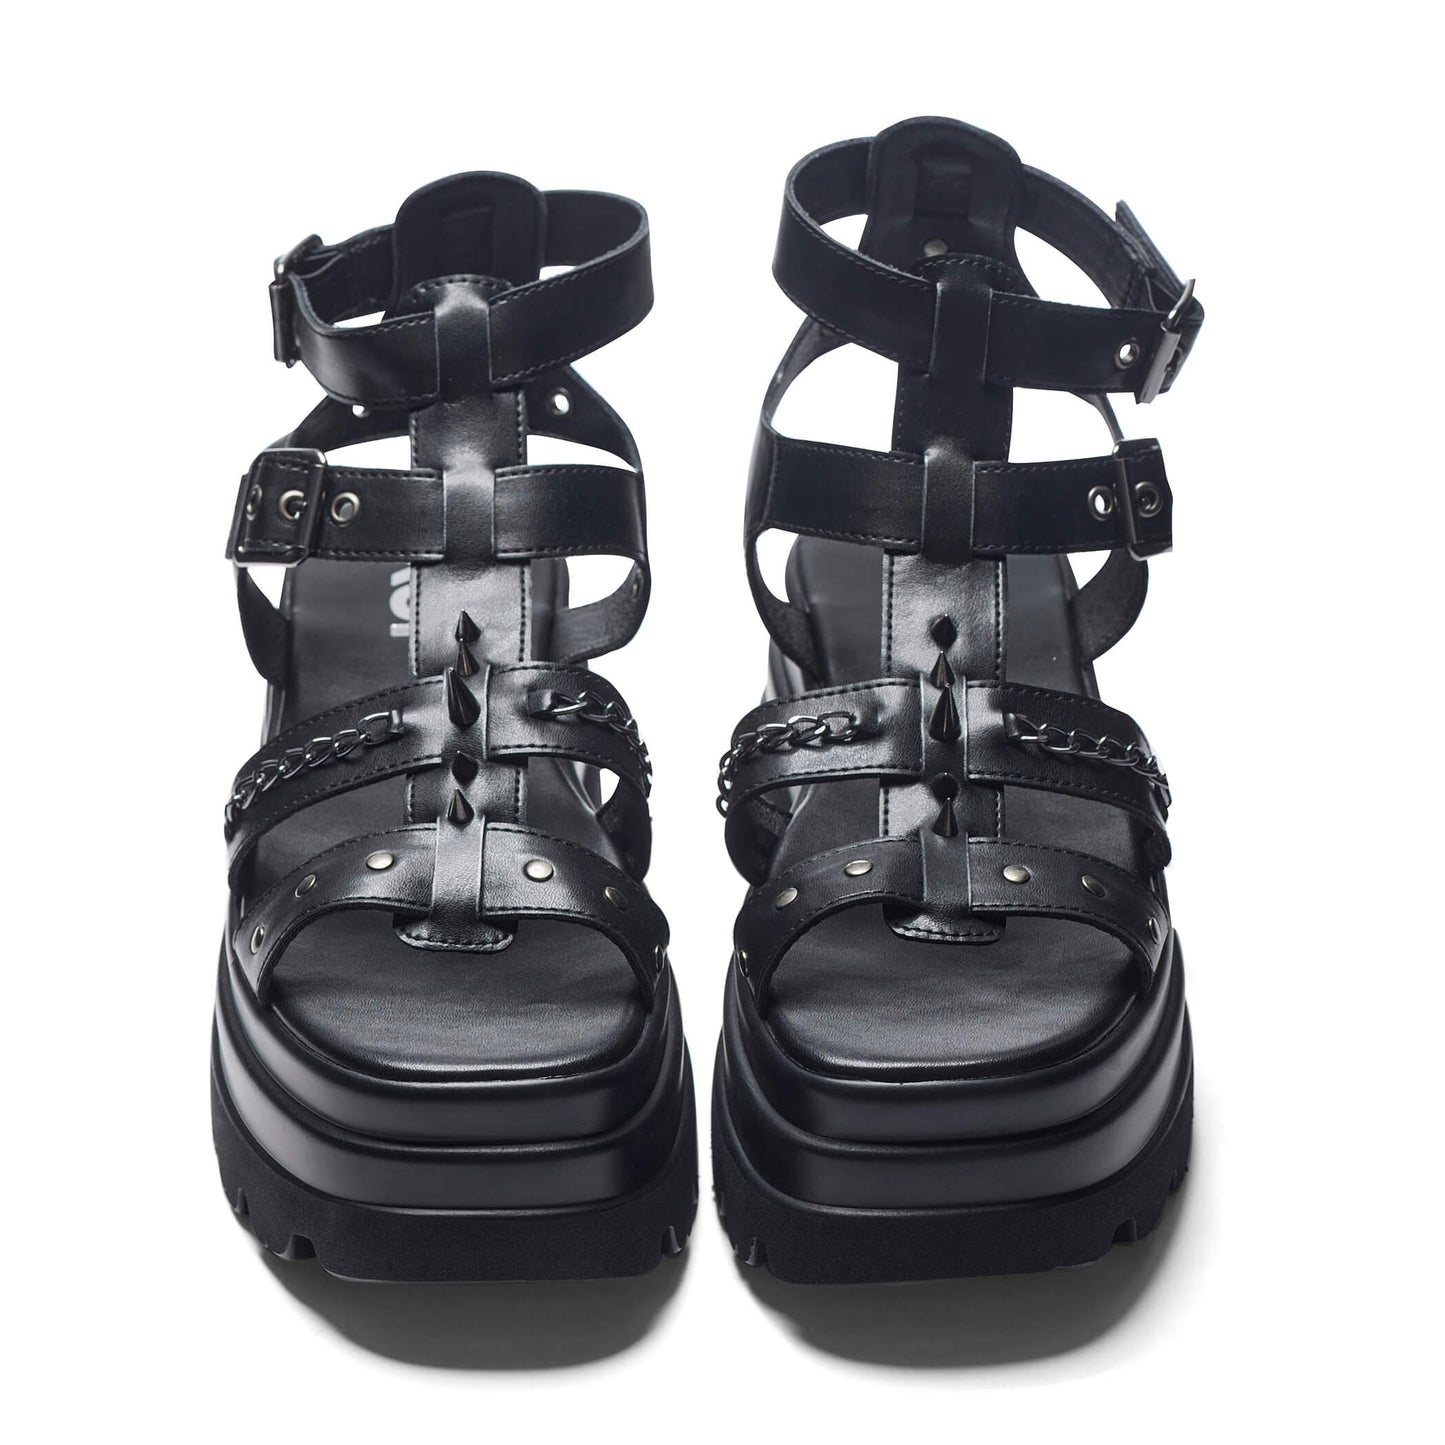 The Divine Destruction Spiked Chunky Sandals - Black - Koi Footwear - Front View